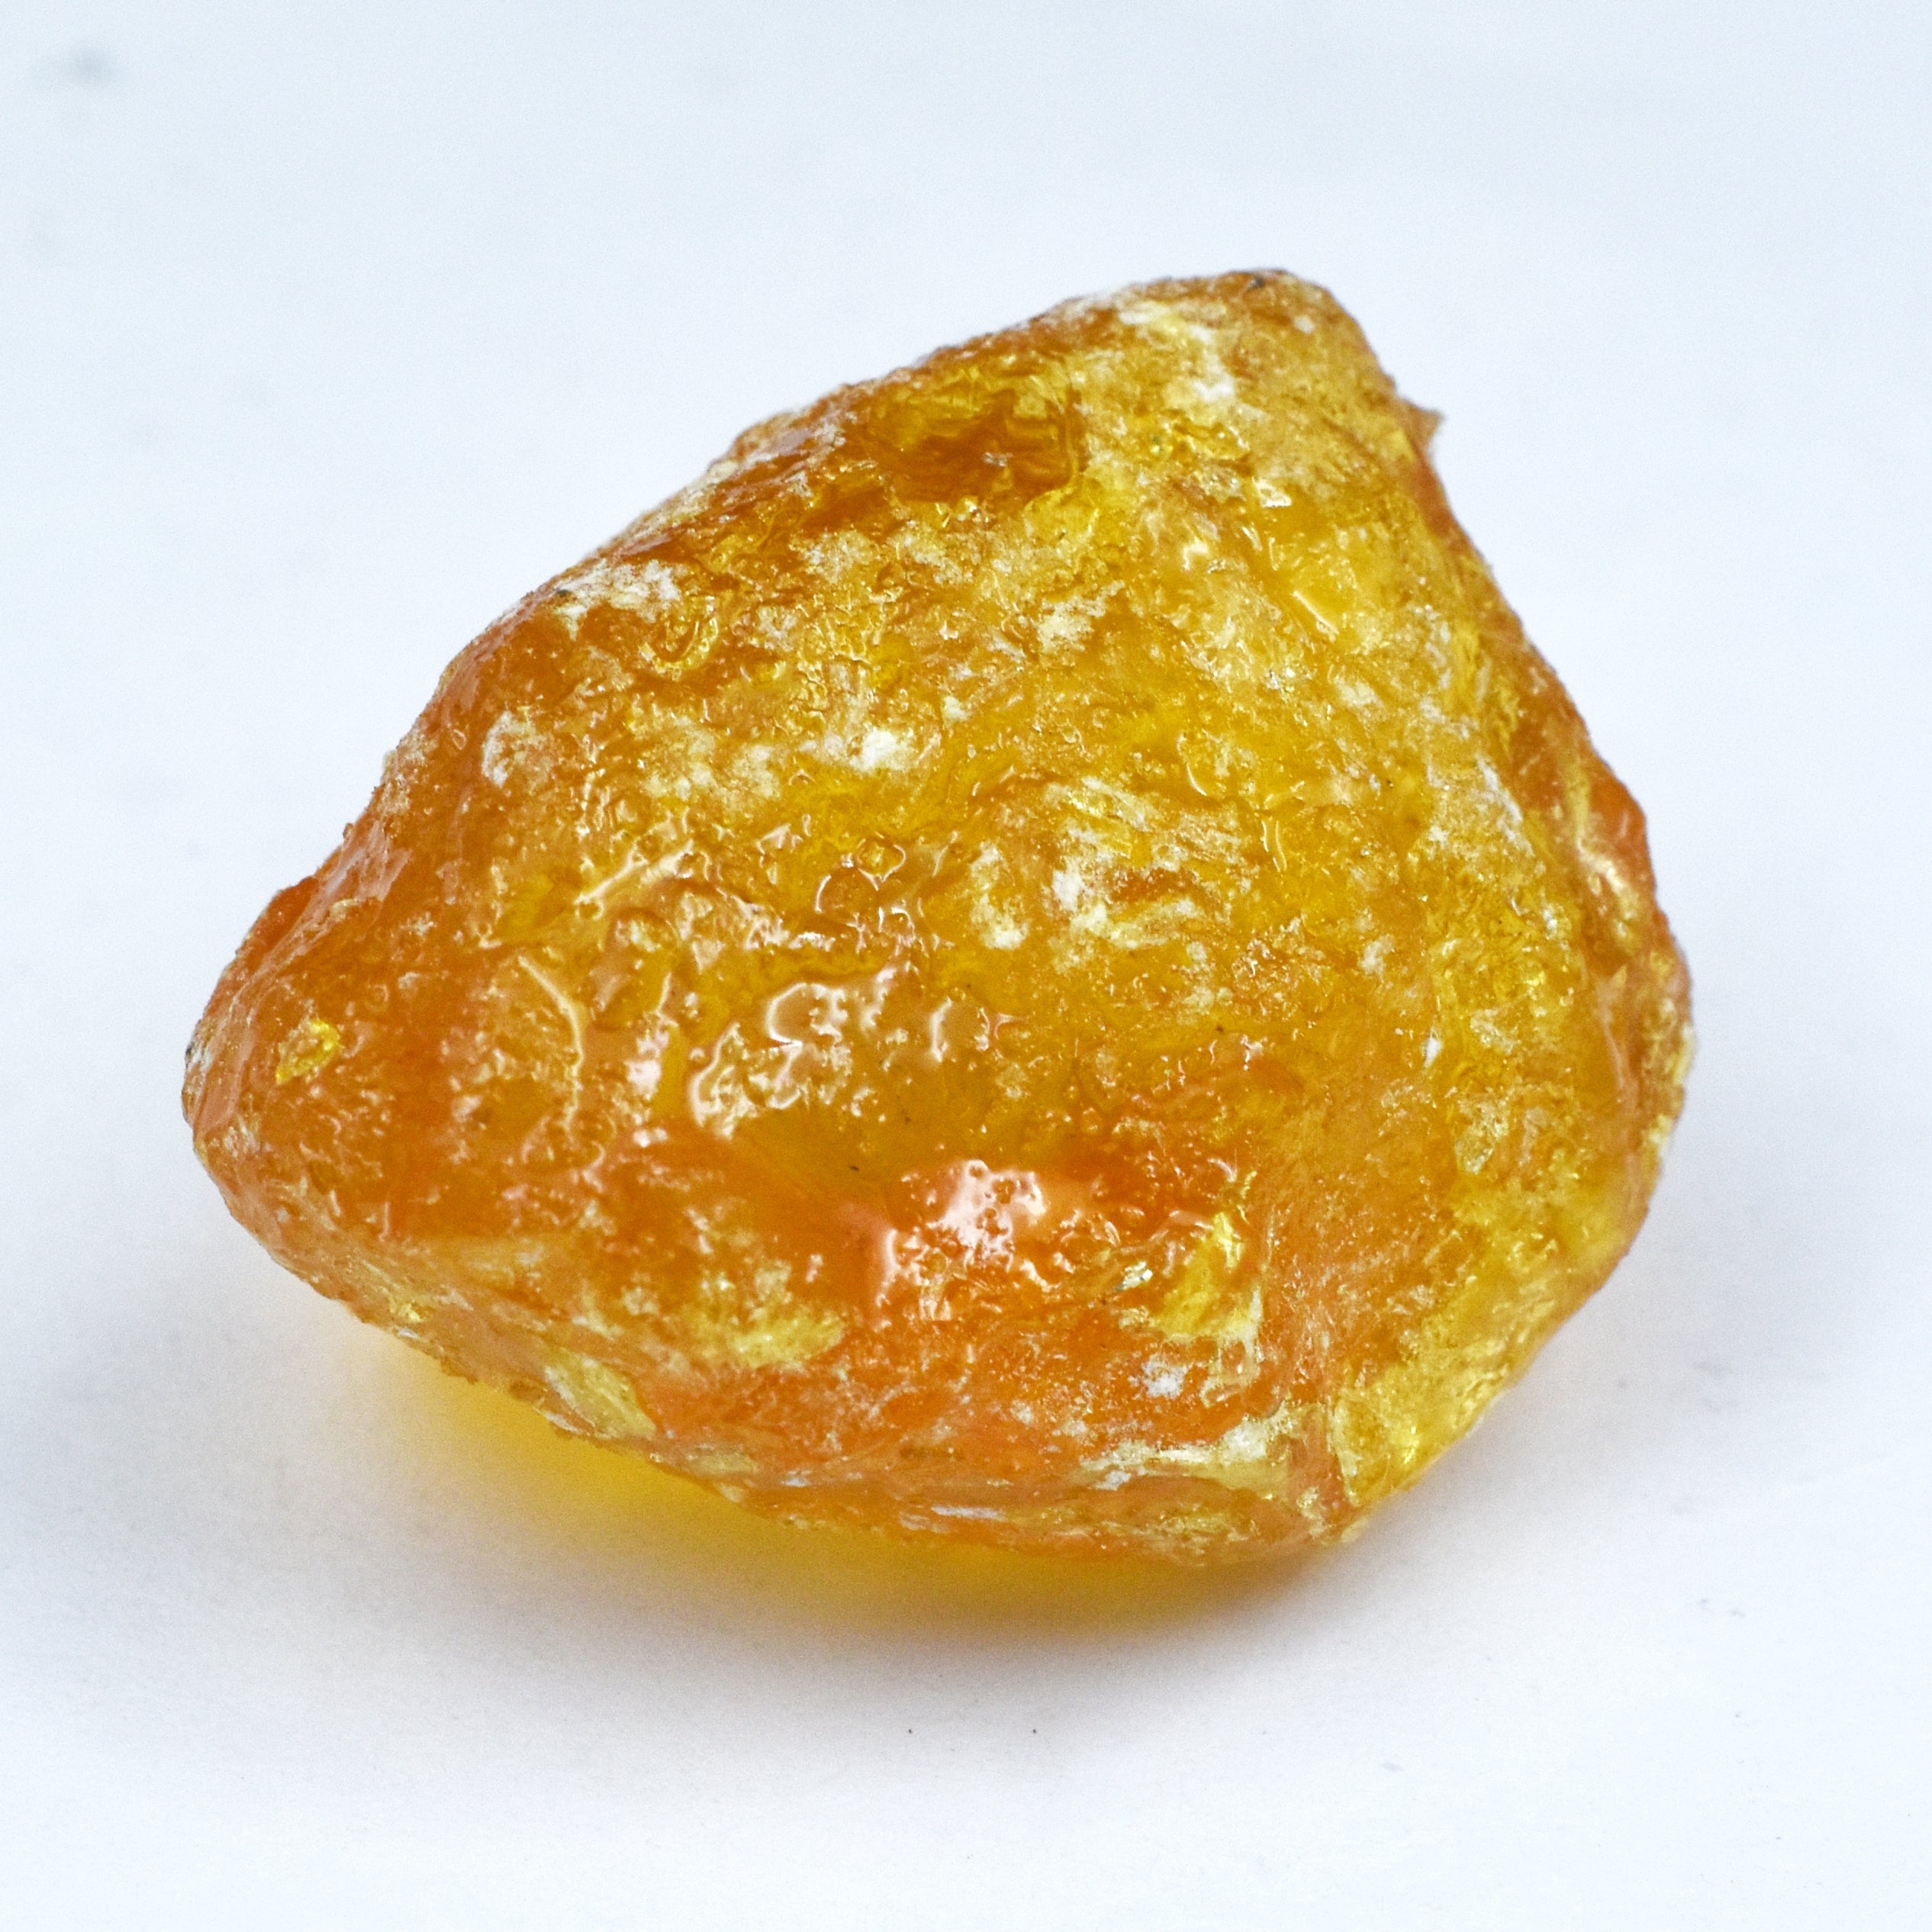 Certified Uncut Rough 31.52 Carat Natural Baltic Amber Yellow Rough Earth Mined Certified Loose Gemstone Madagascar Huge  Size Amber Rough For Jewelry Making